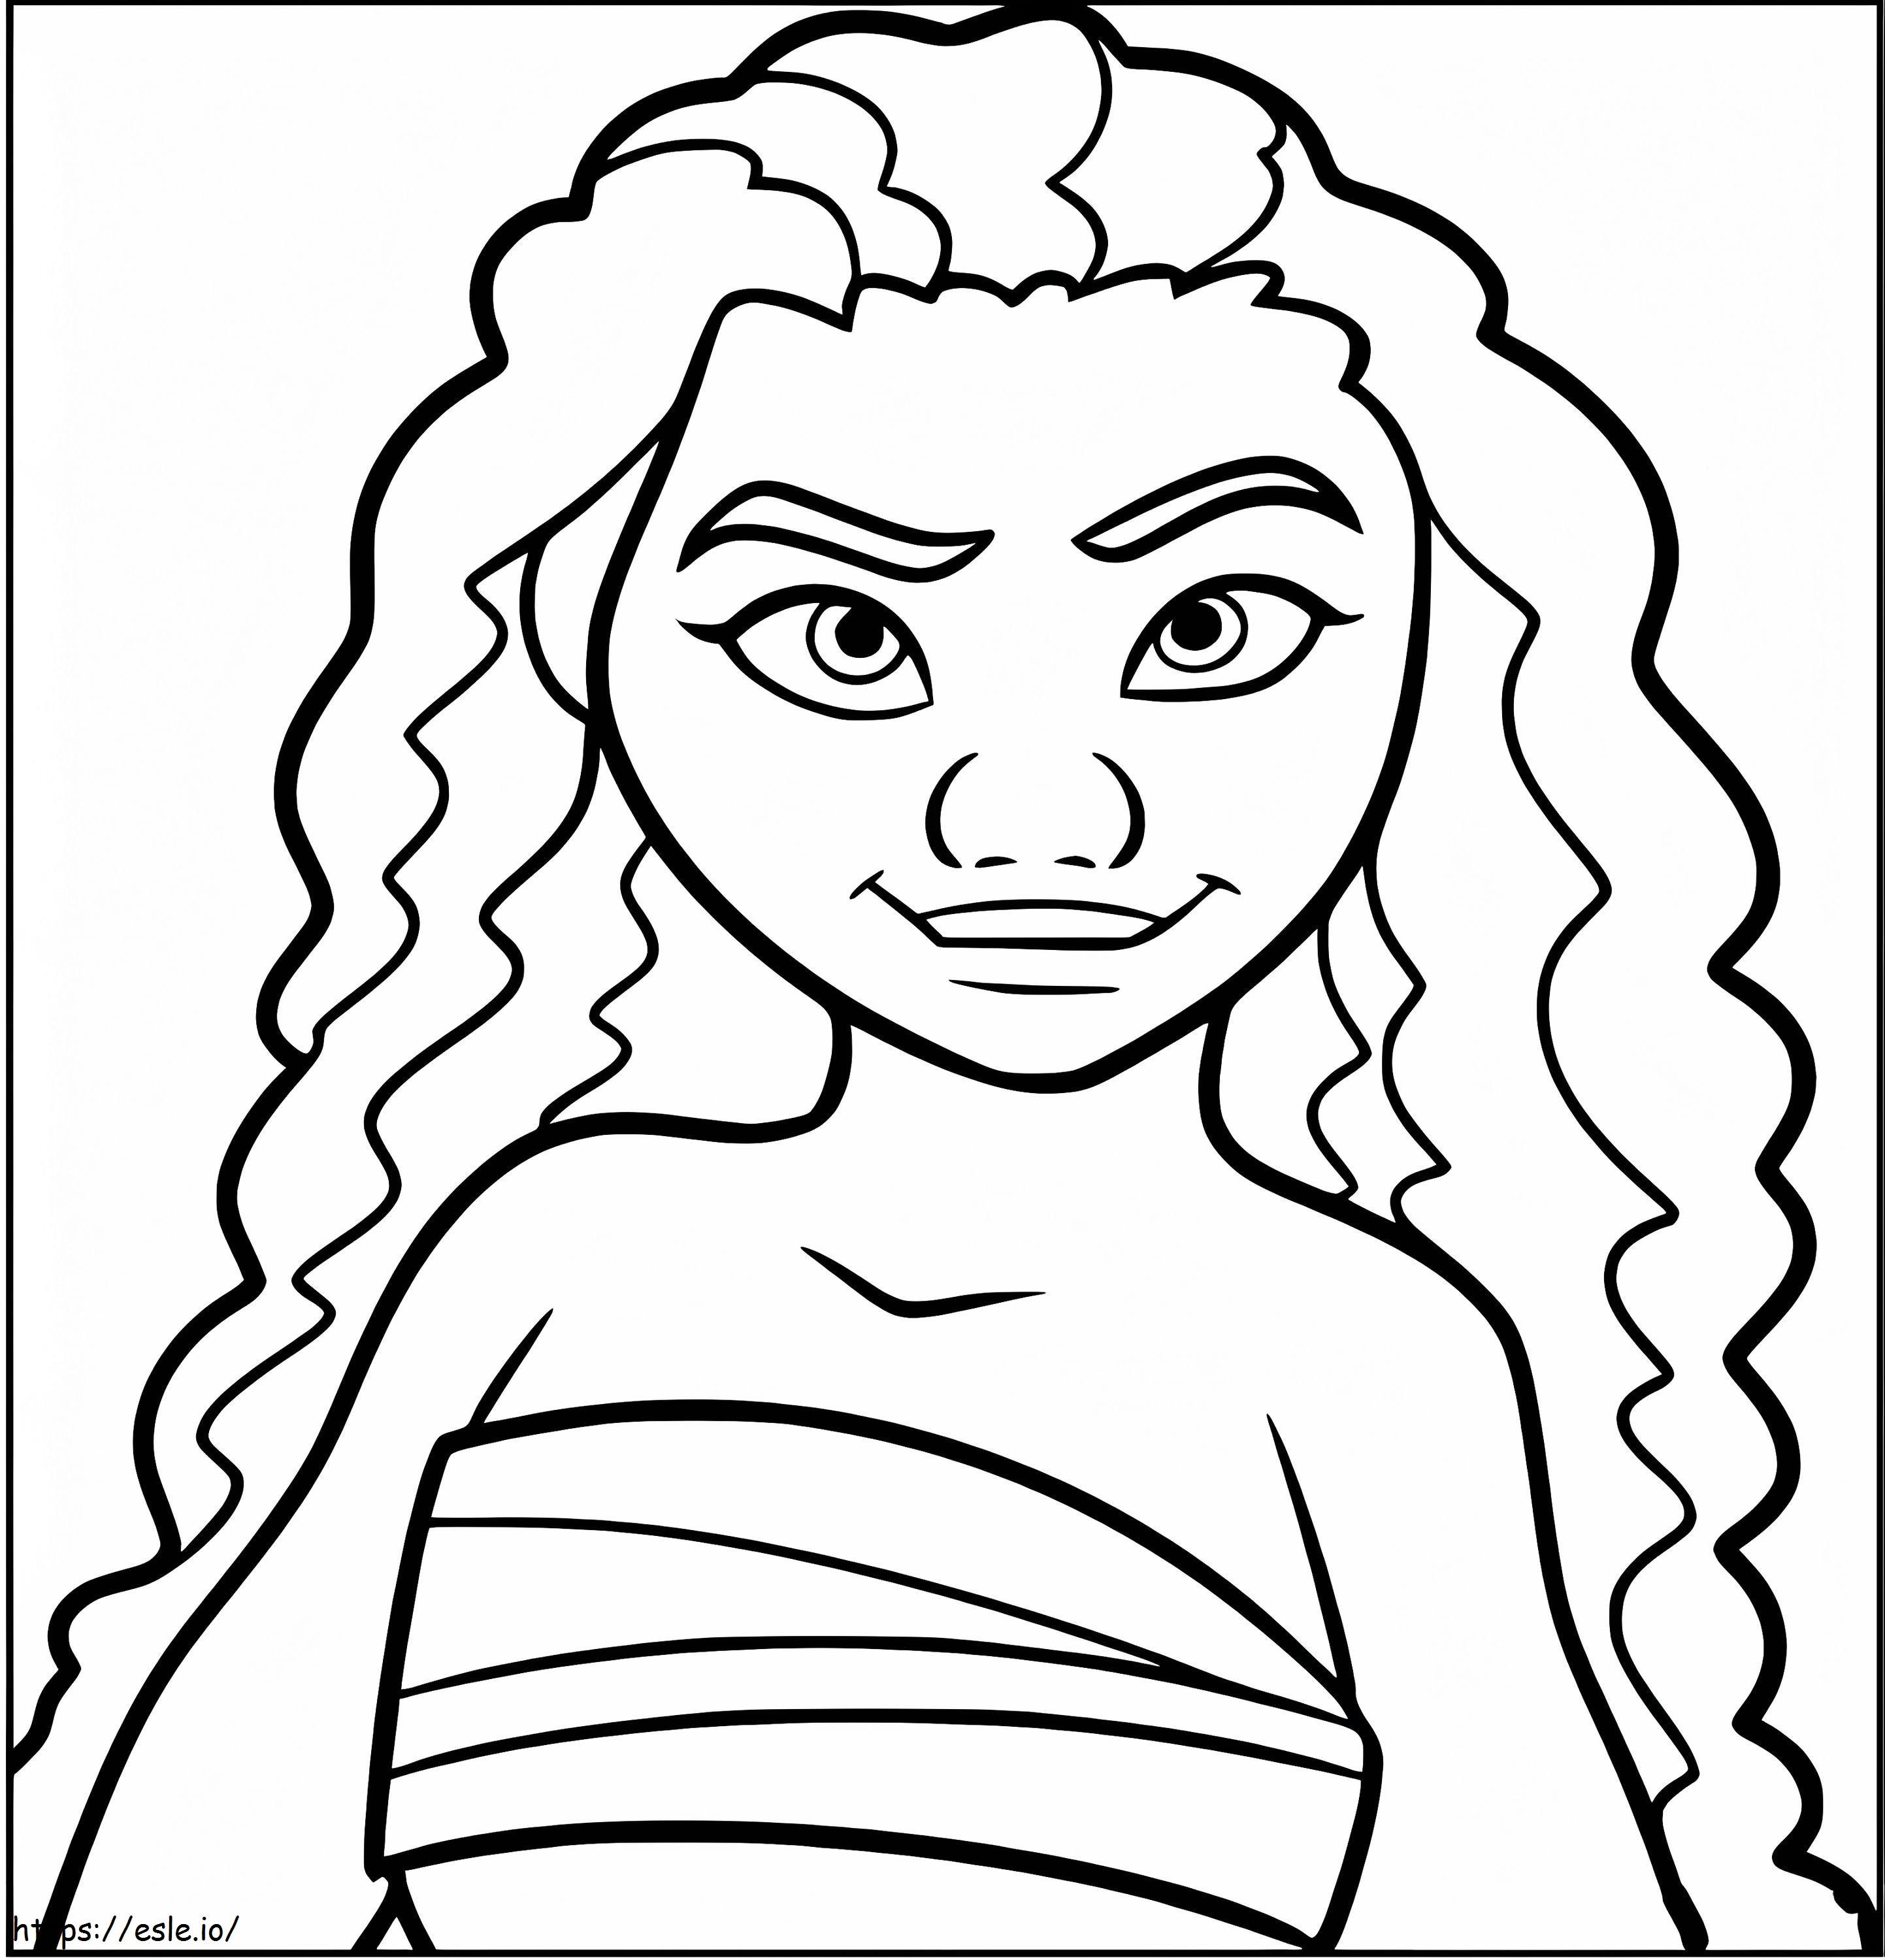 Moana Is Happy coloring page